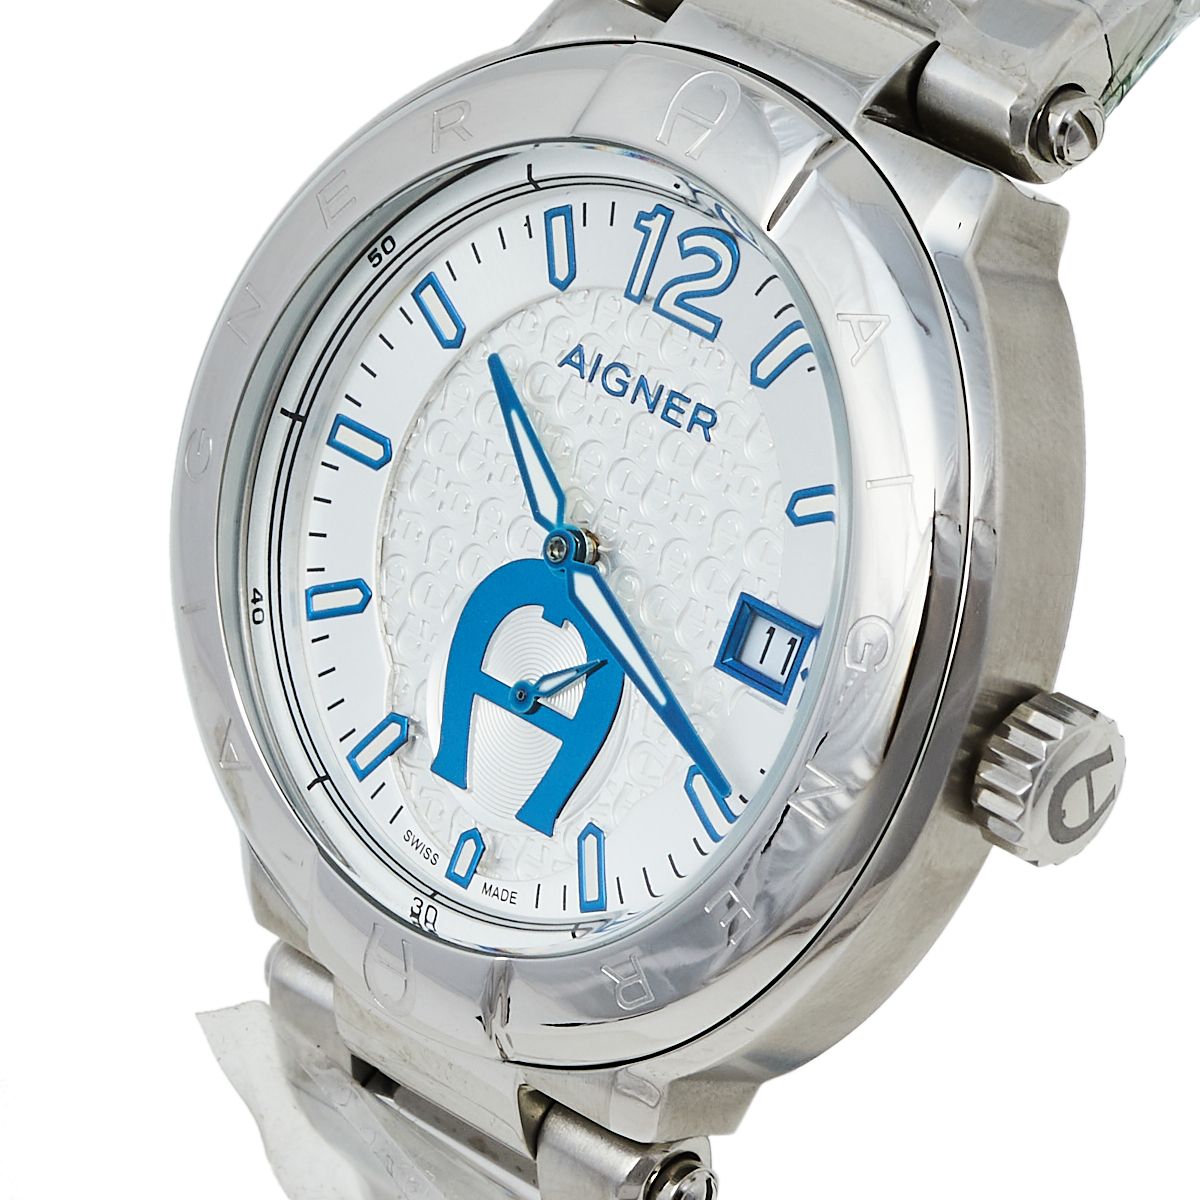 

Aigner Silver Blue Stainless Steel A133100 Monza Men's Wristwatch, White